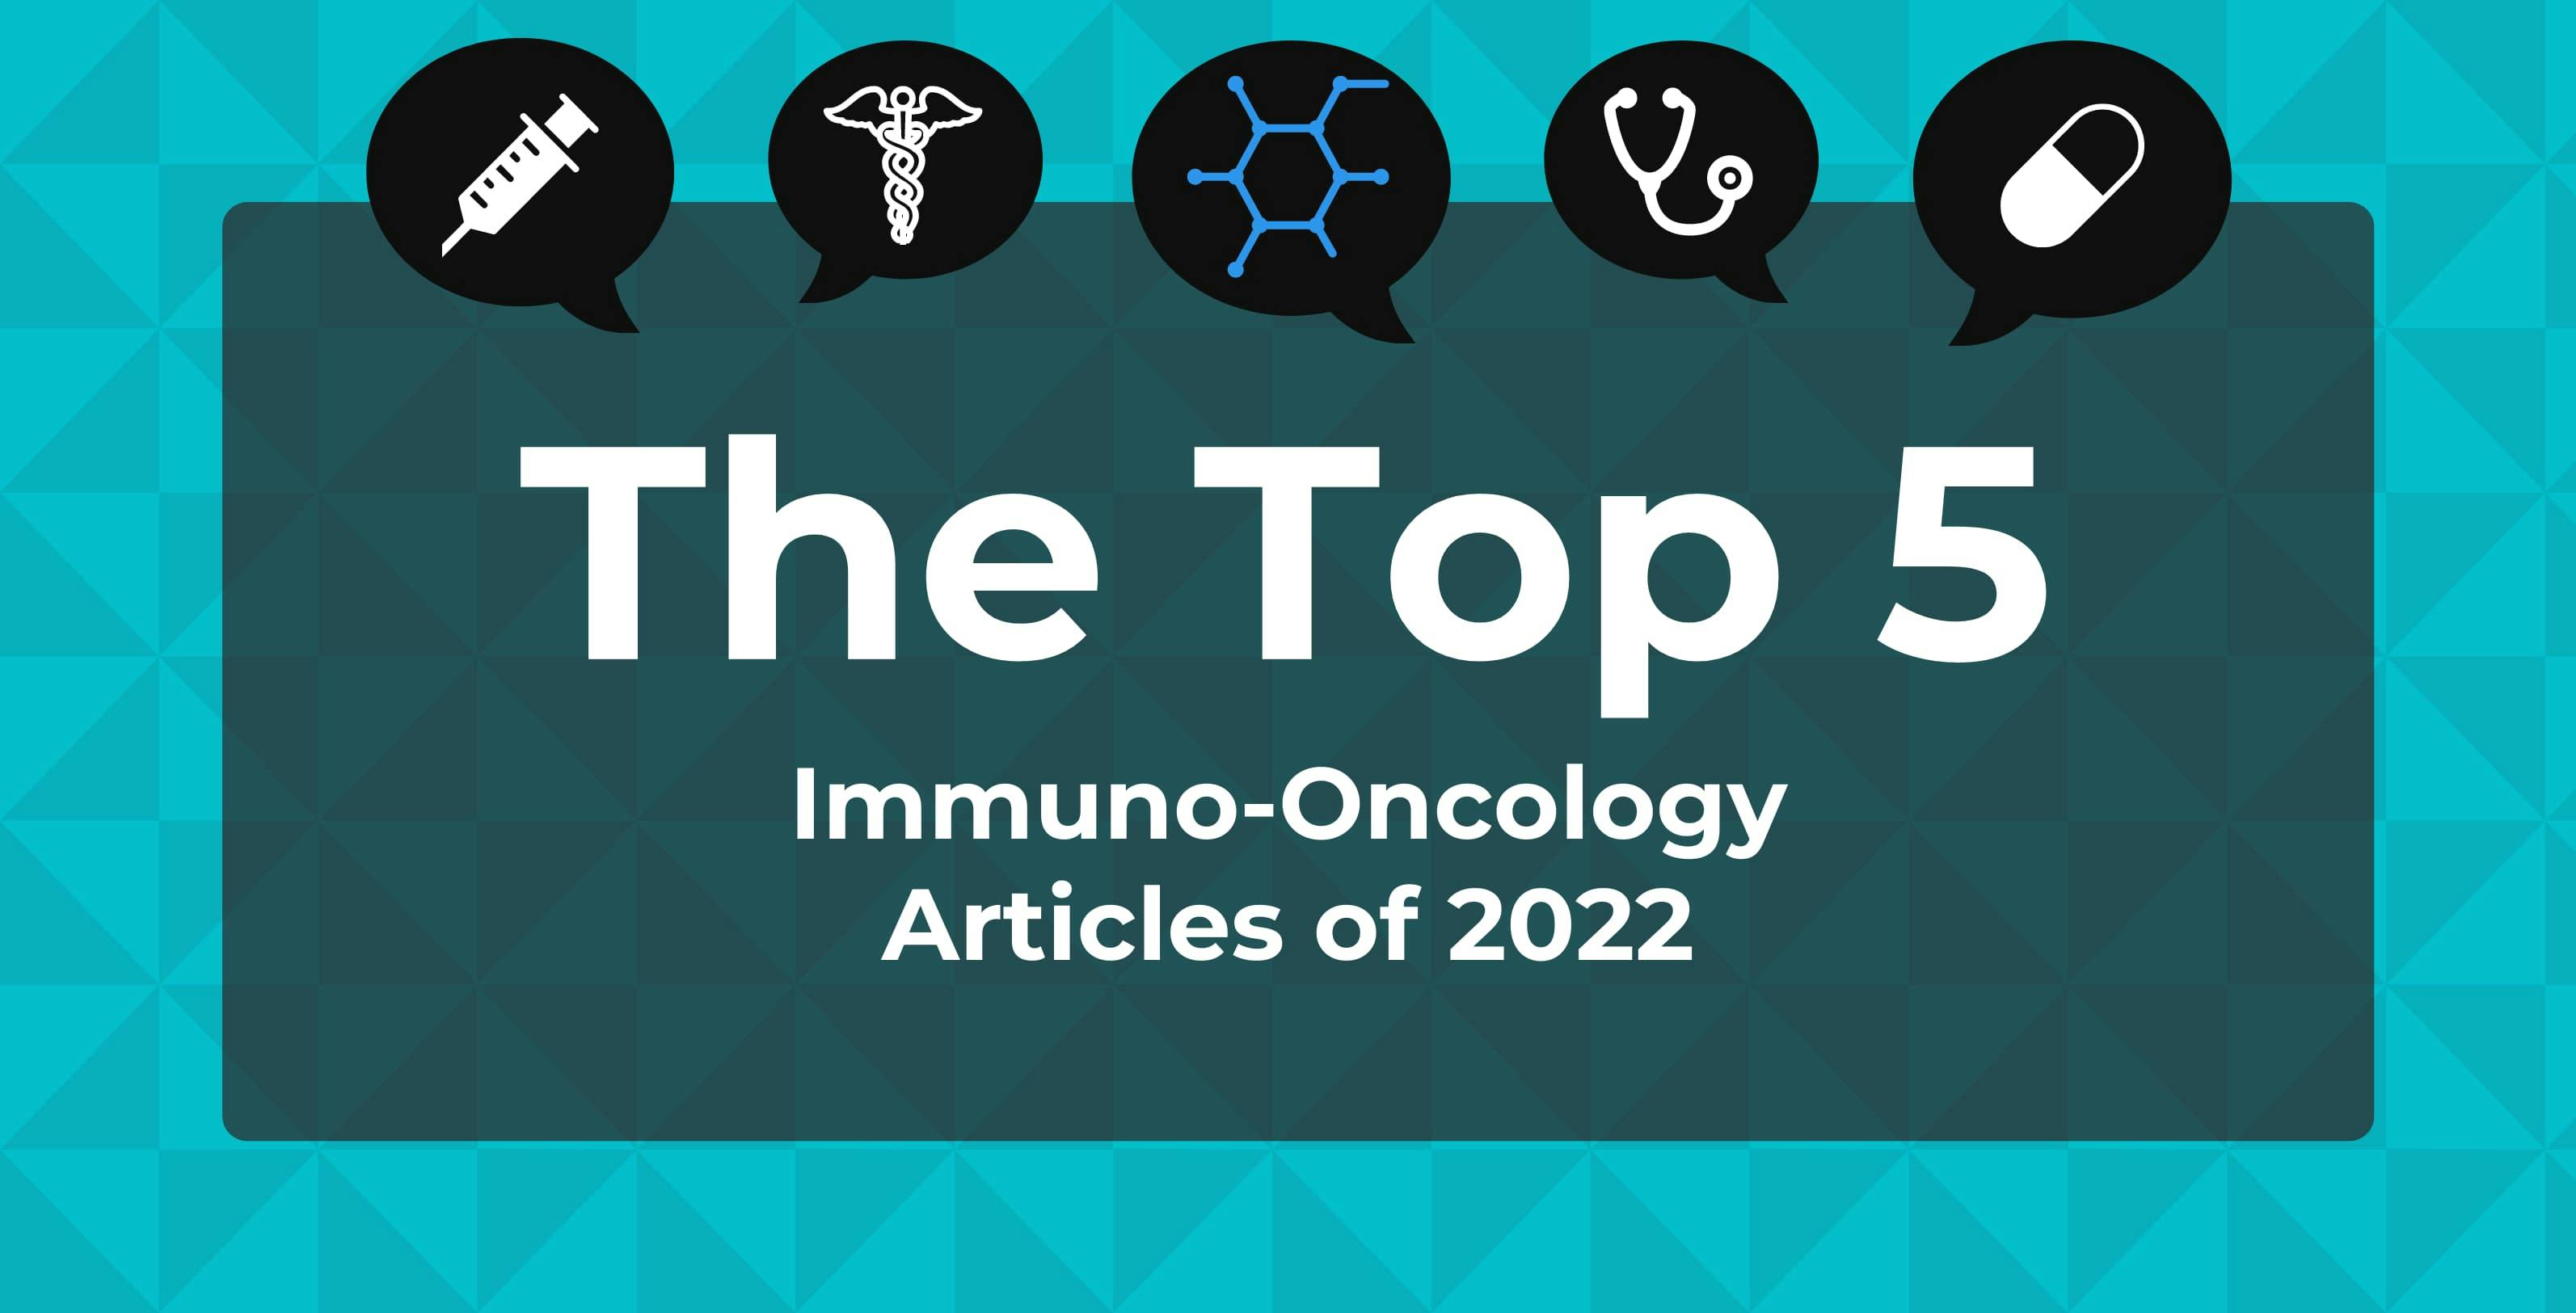 Top 5 Most-Read Immuno-Oncology Articles of 2022